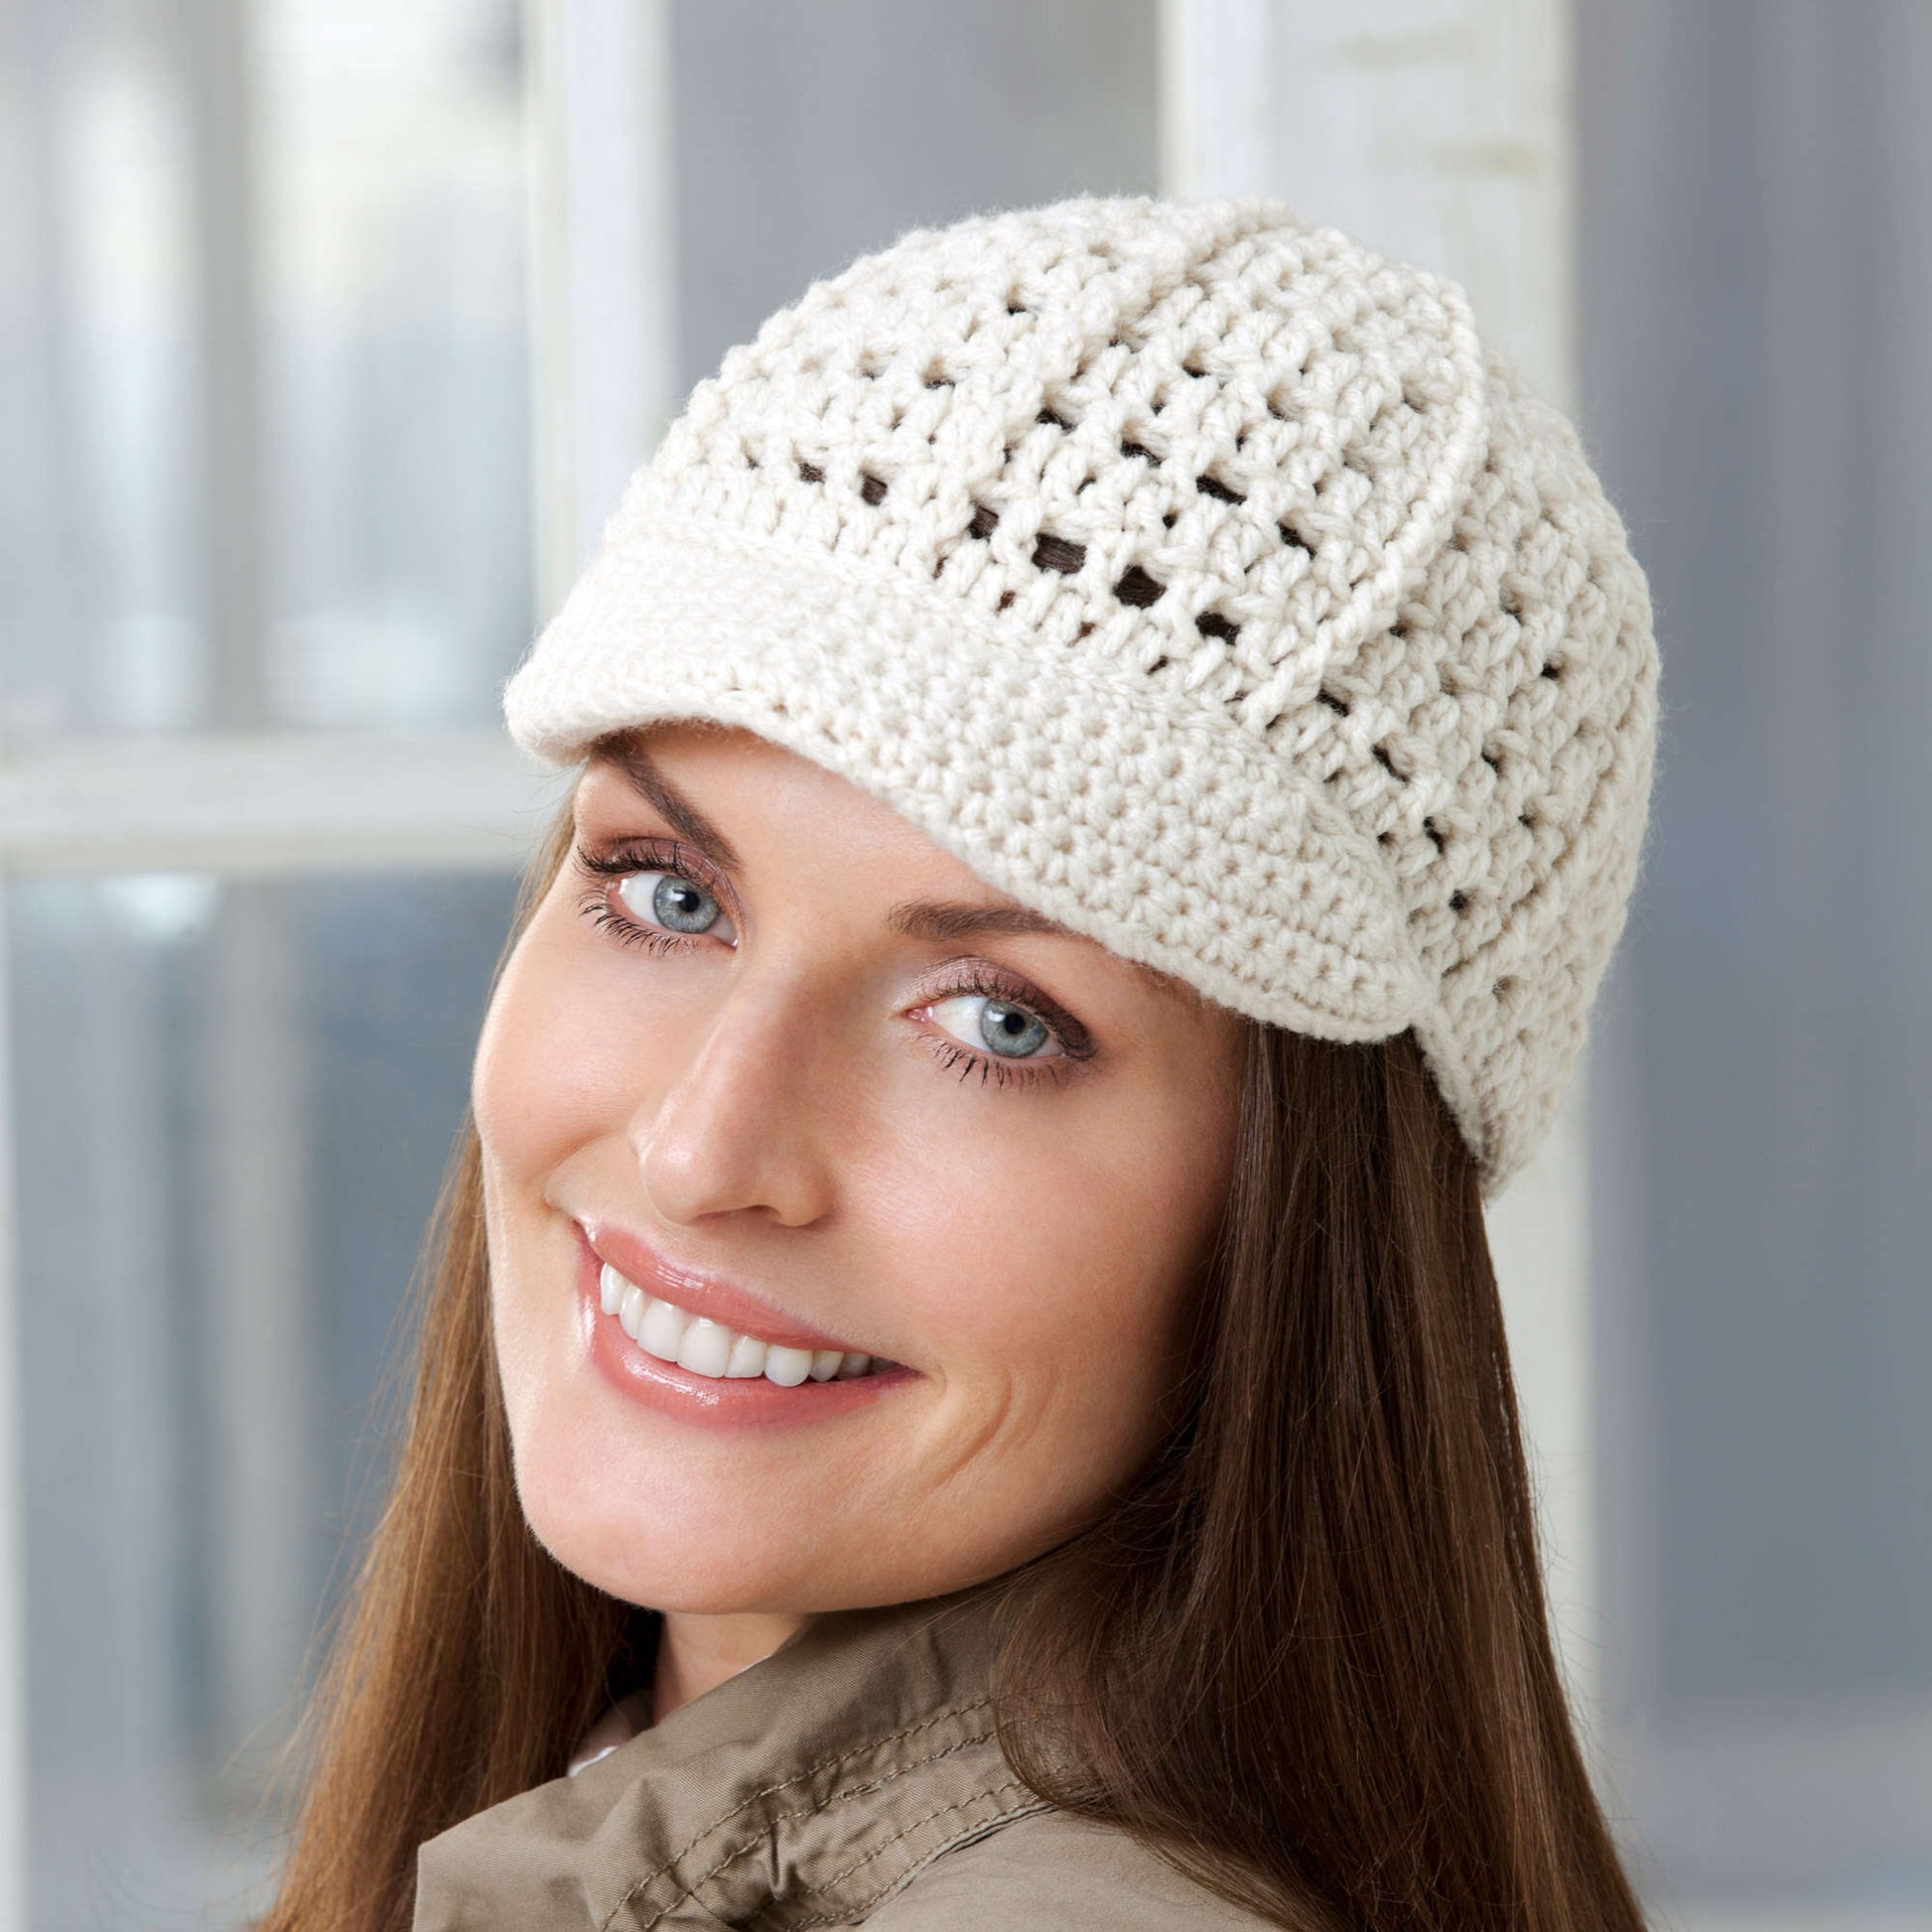 Free Red Heart Crochet Brimming With Fun Cap Pattern